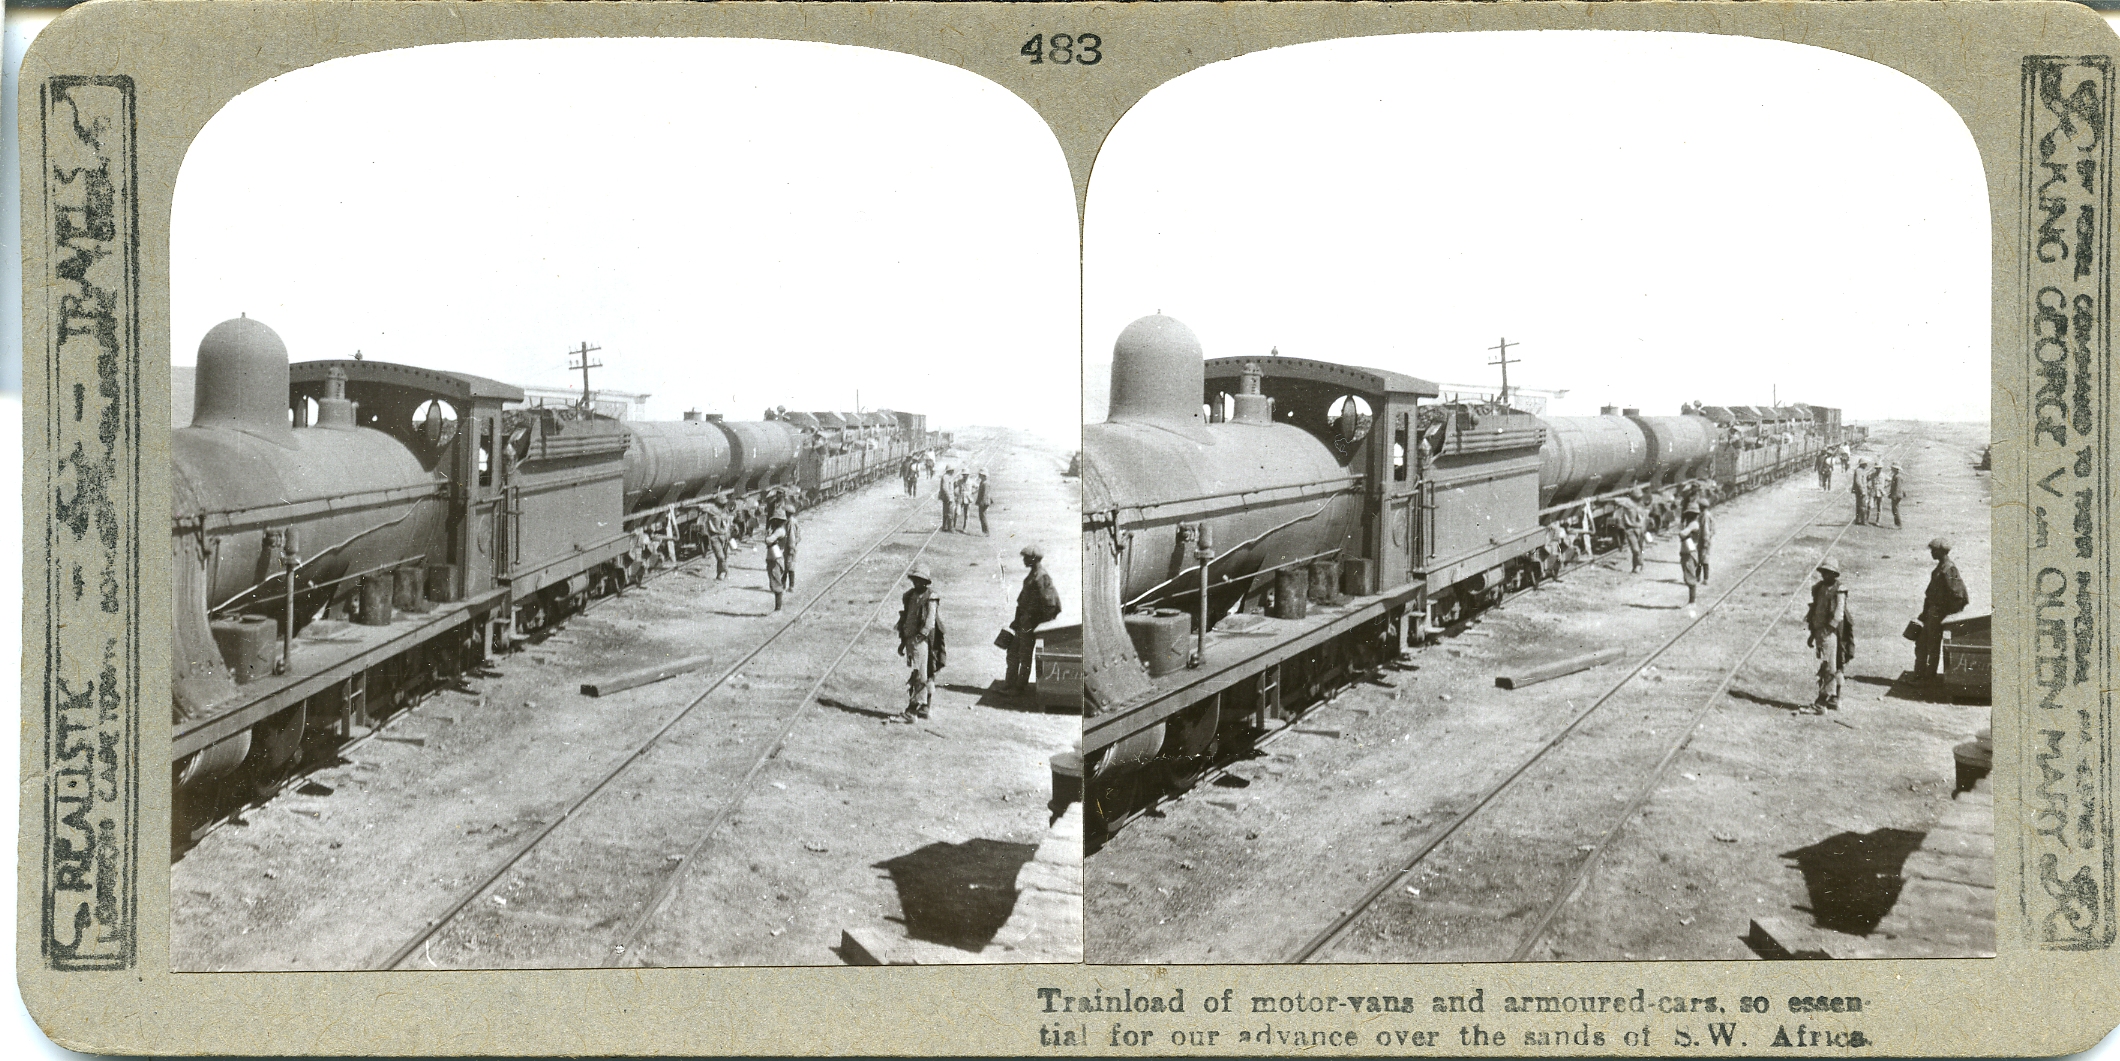 Trainload of motor-vans and armoured-cars, so central for our advance over the sands of S.W. Africa